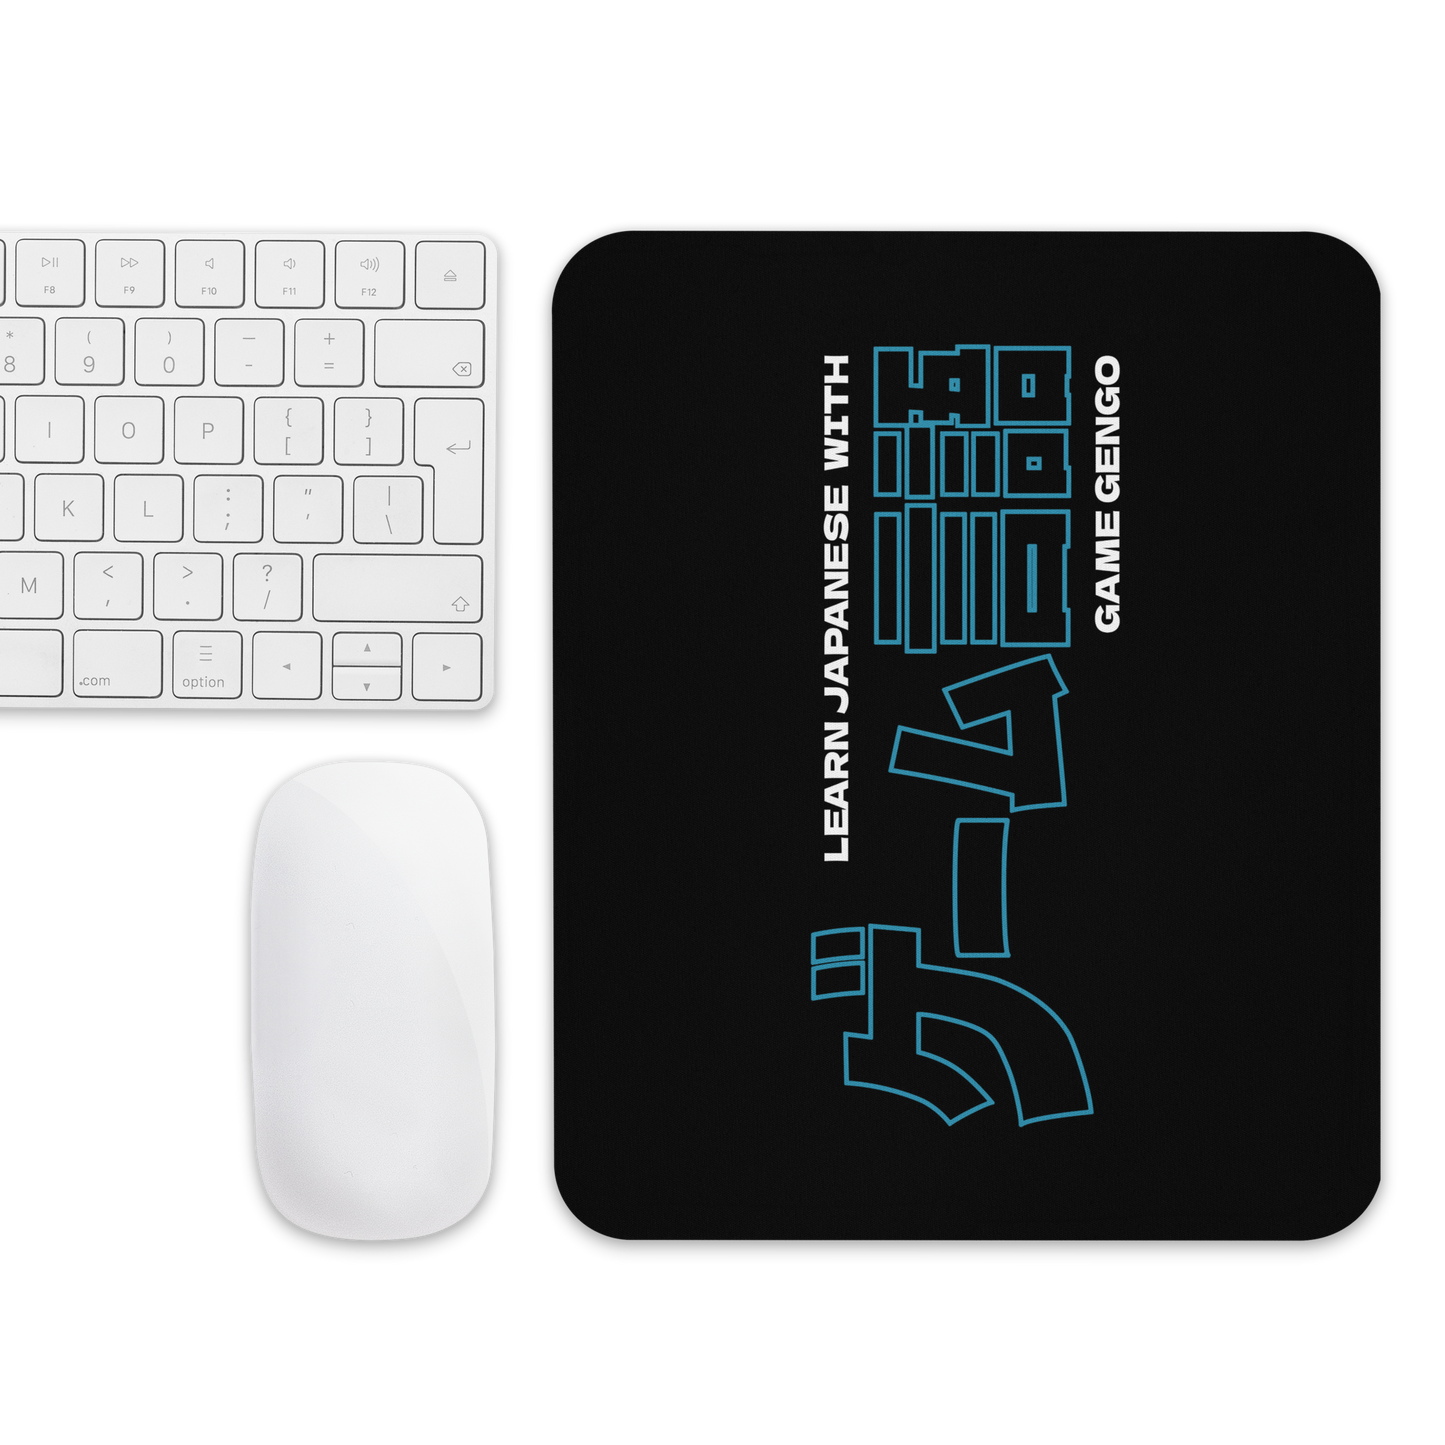 Game Gengo Mouse Pad